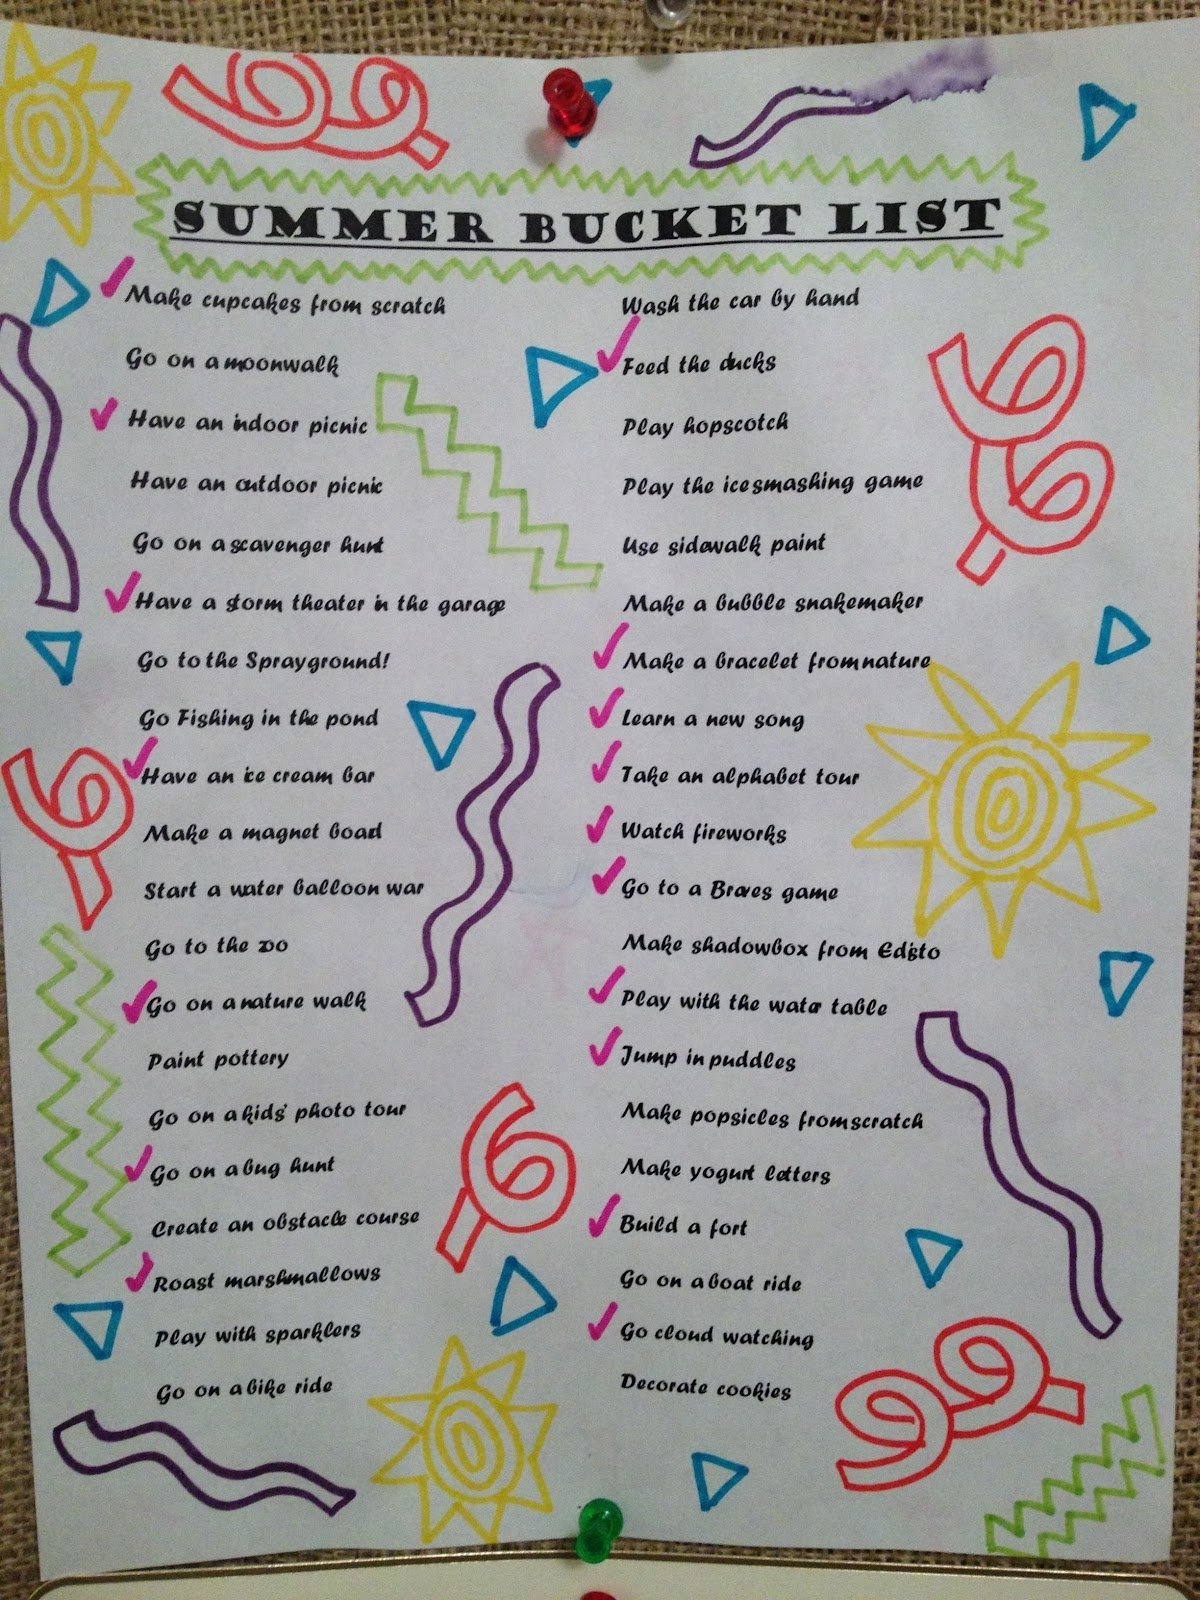 10 Cute Summer Ideas For College Students doc momma summer bucket list 2022